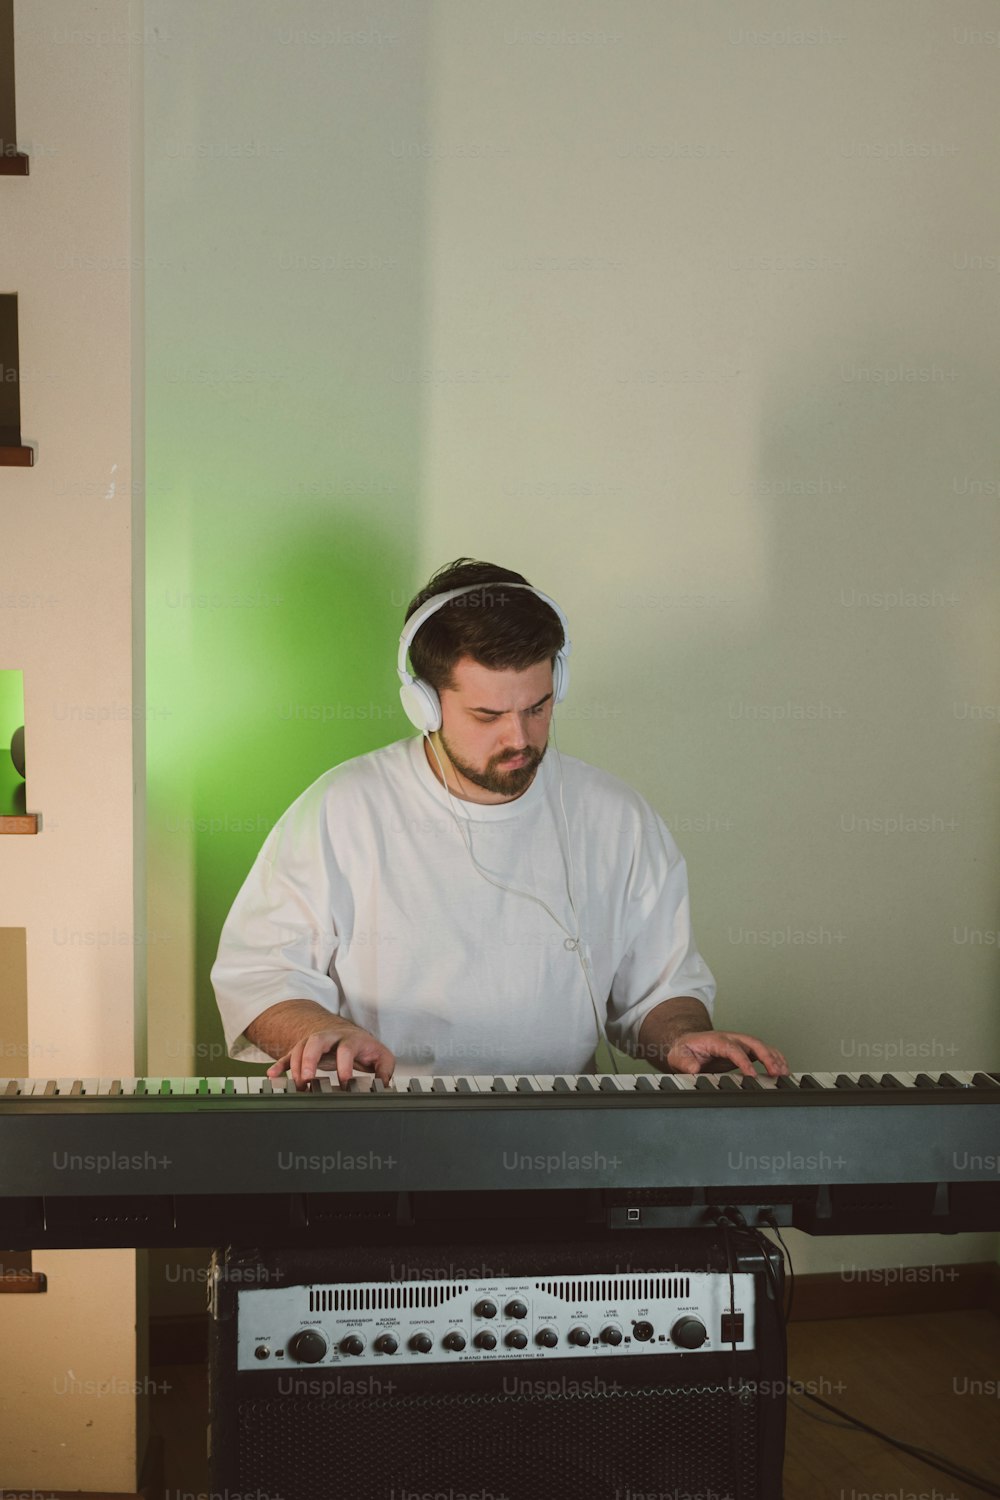 a man in a white shirt is playing a keyboard